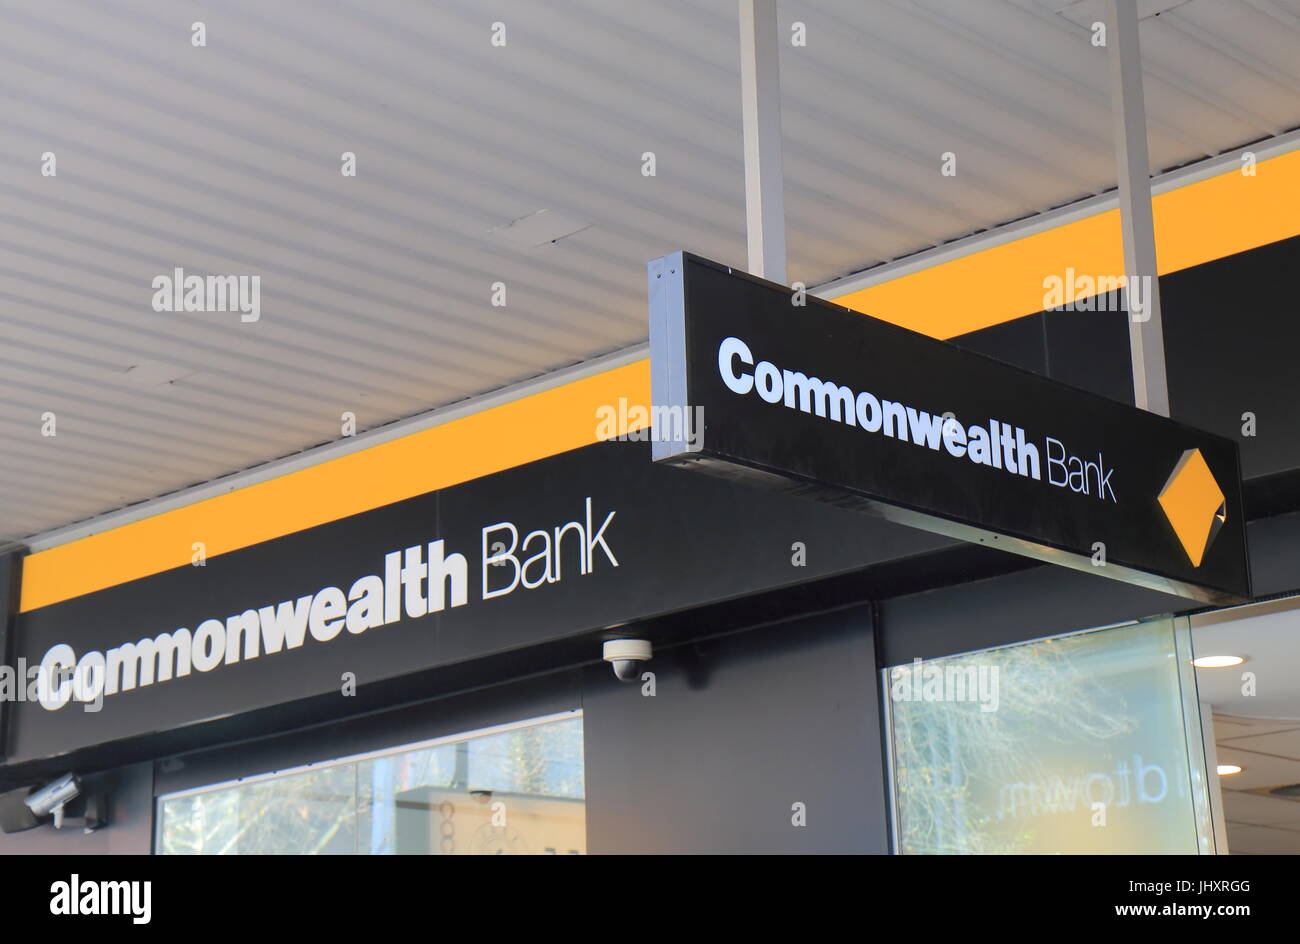 Commonwealth Bank of Australia. Commonwealth Bank also known as CBA is